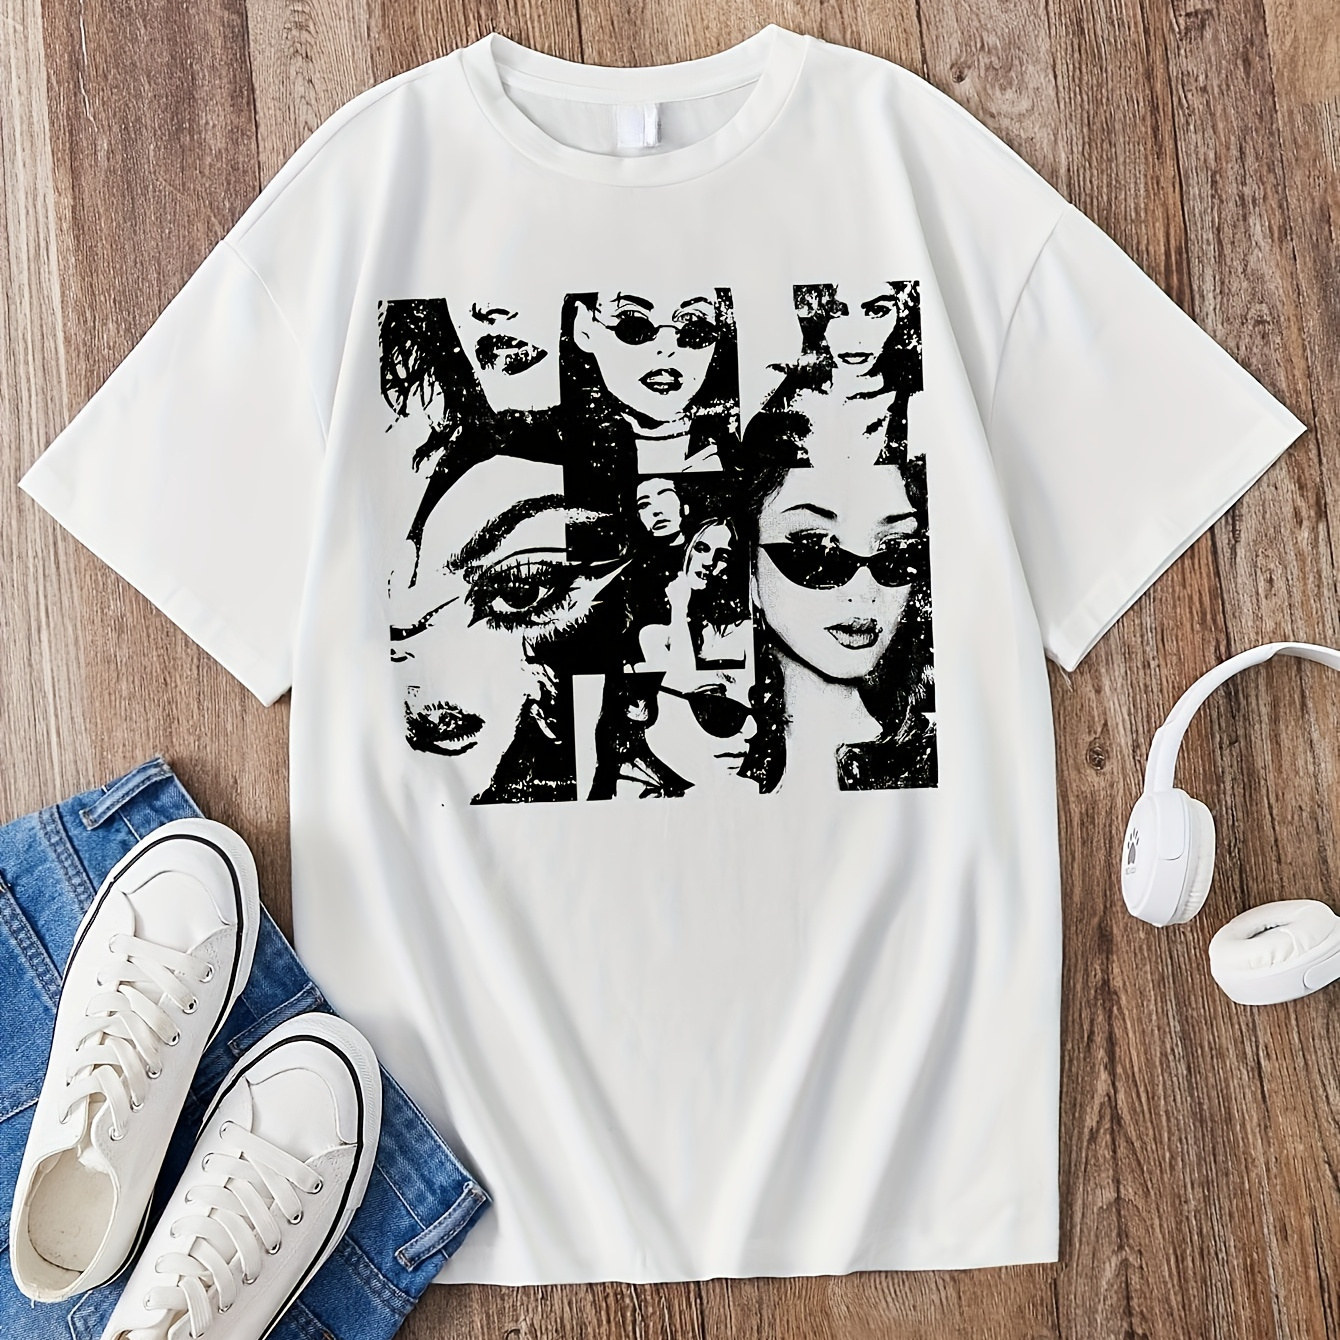 

Knit Vintage Portrait Graphic Short Sleeve Crew Neck T-shirt For Girls, Casual Comfy Breathable Summer Tee Top Cute Gift